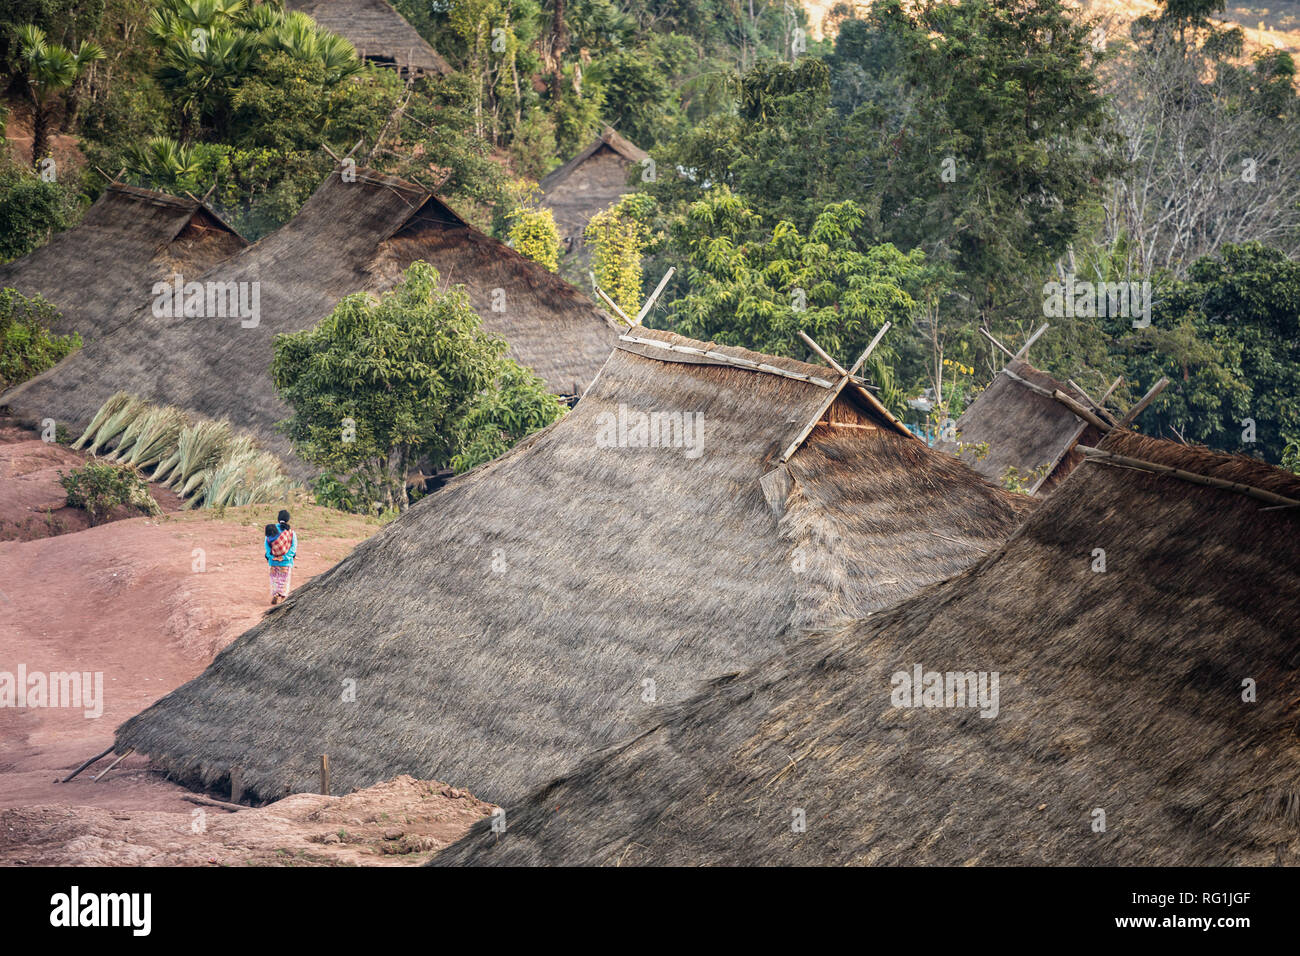 Hill tribe village In thailand Stock Photo